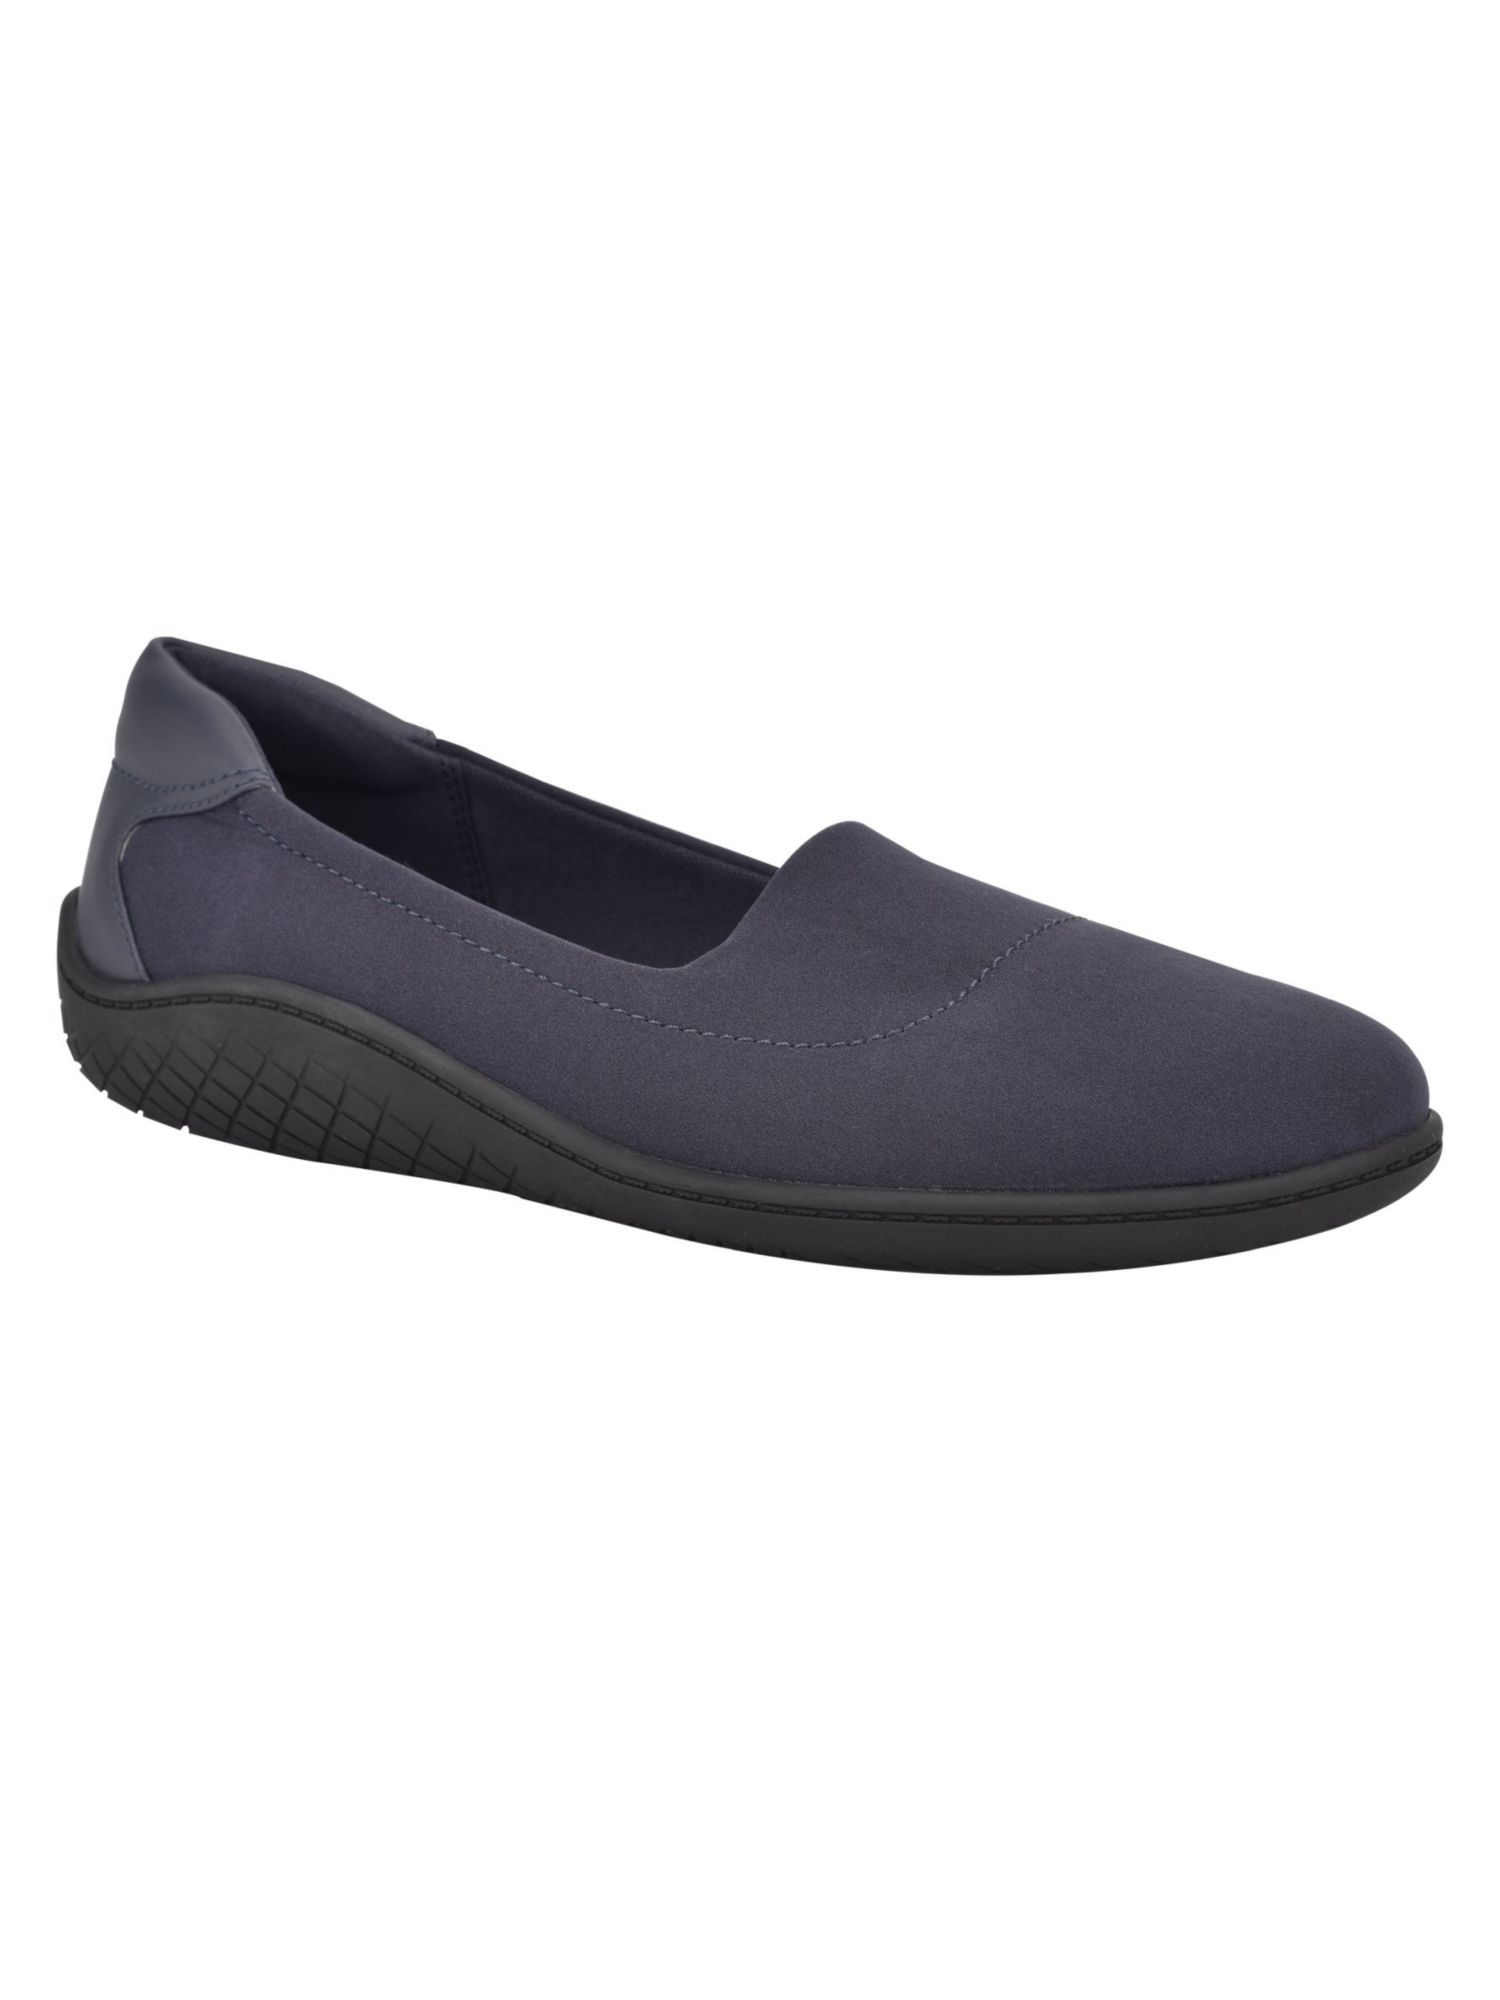 EASY SPIRIT Womens Navy Arch Support Stretch Gift Almond Toe Slip On Athletic Walking Shoes 10 M